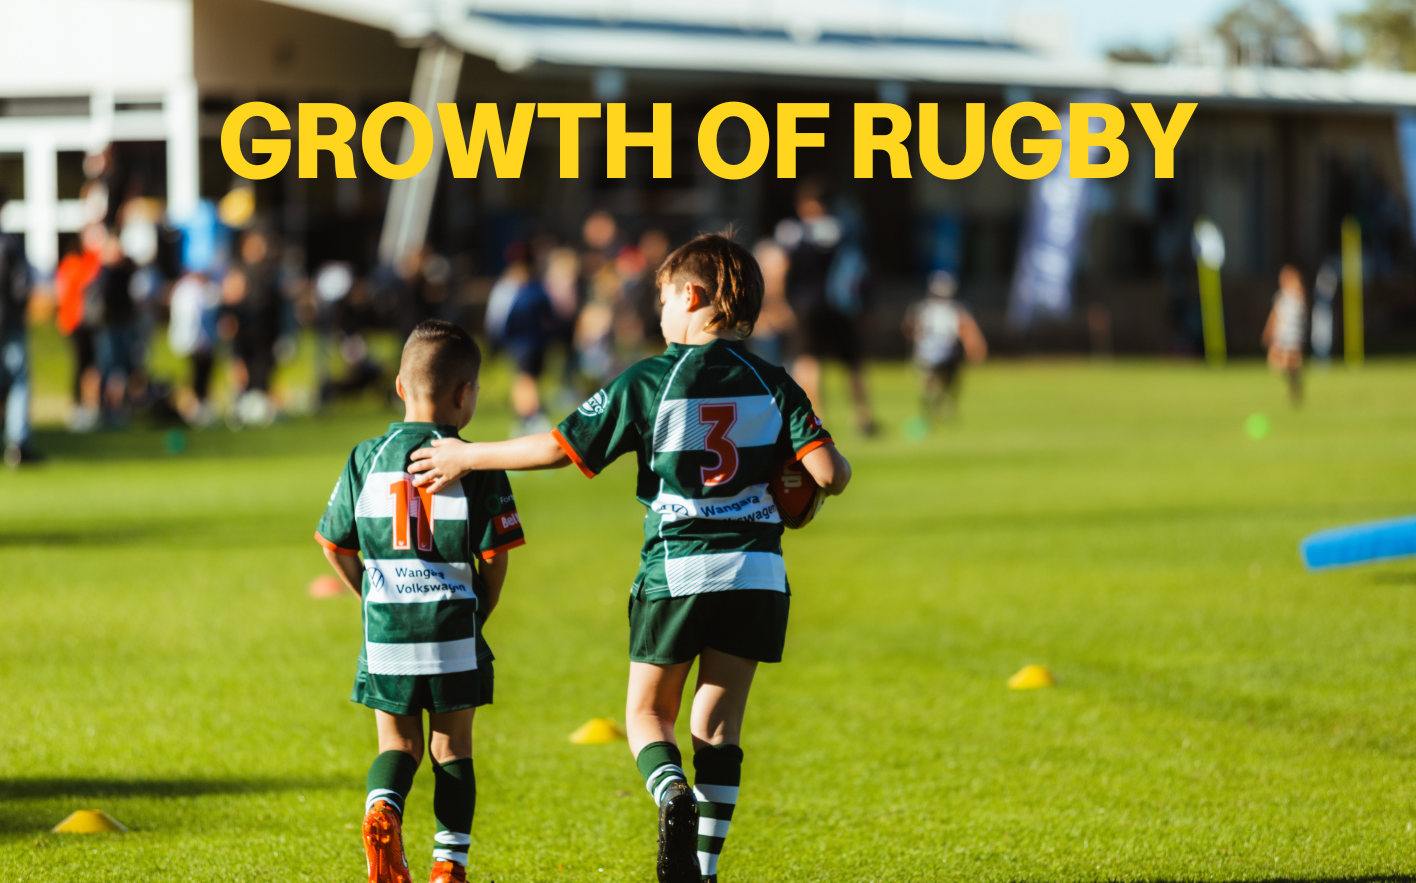 RFWA Growth of Rugby